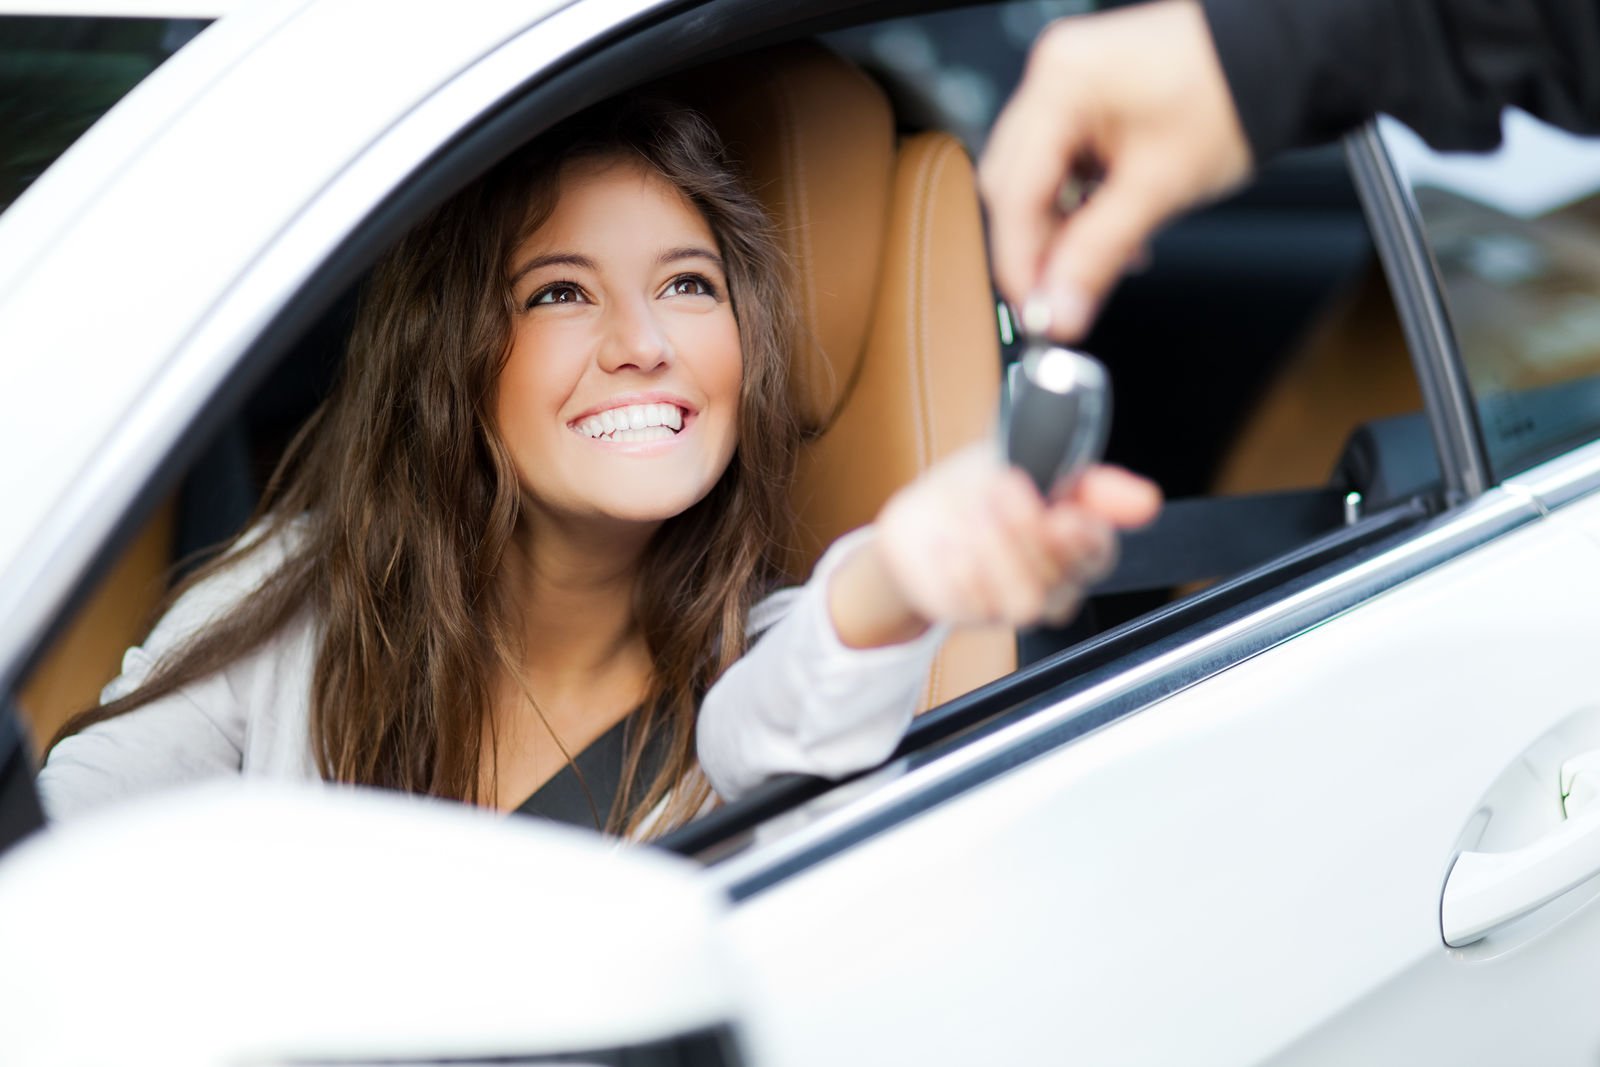 Does car insurance cover driving a friend’s car?